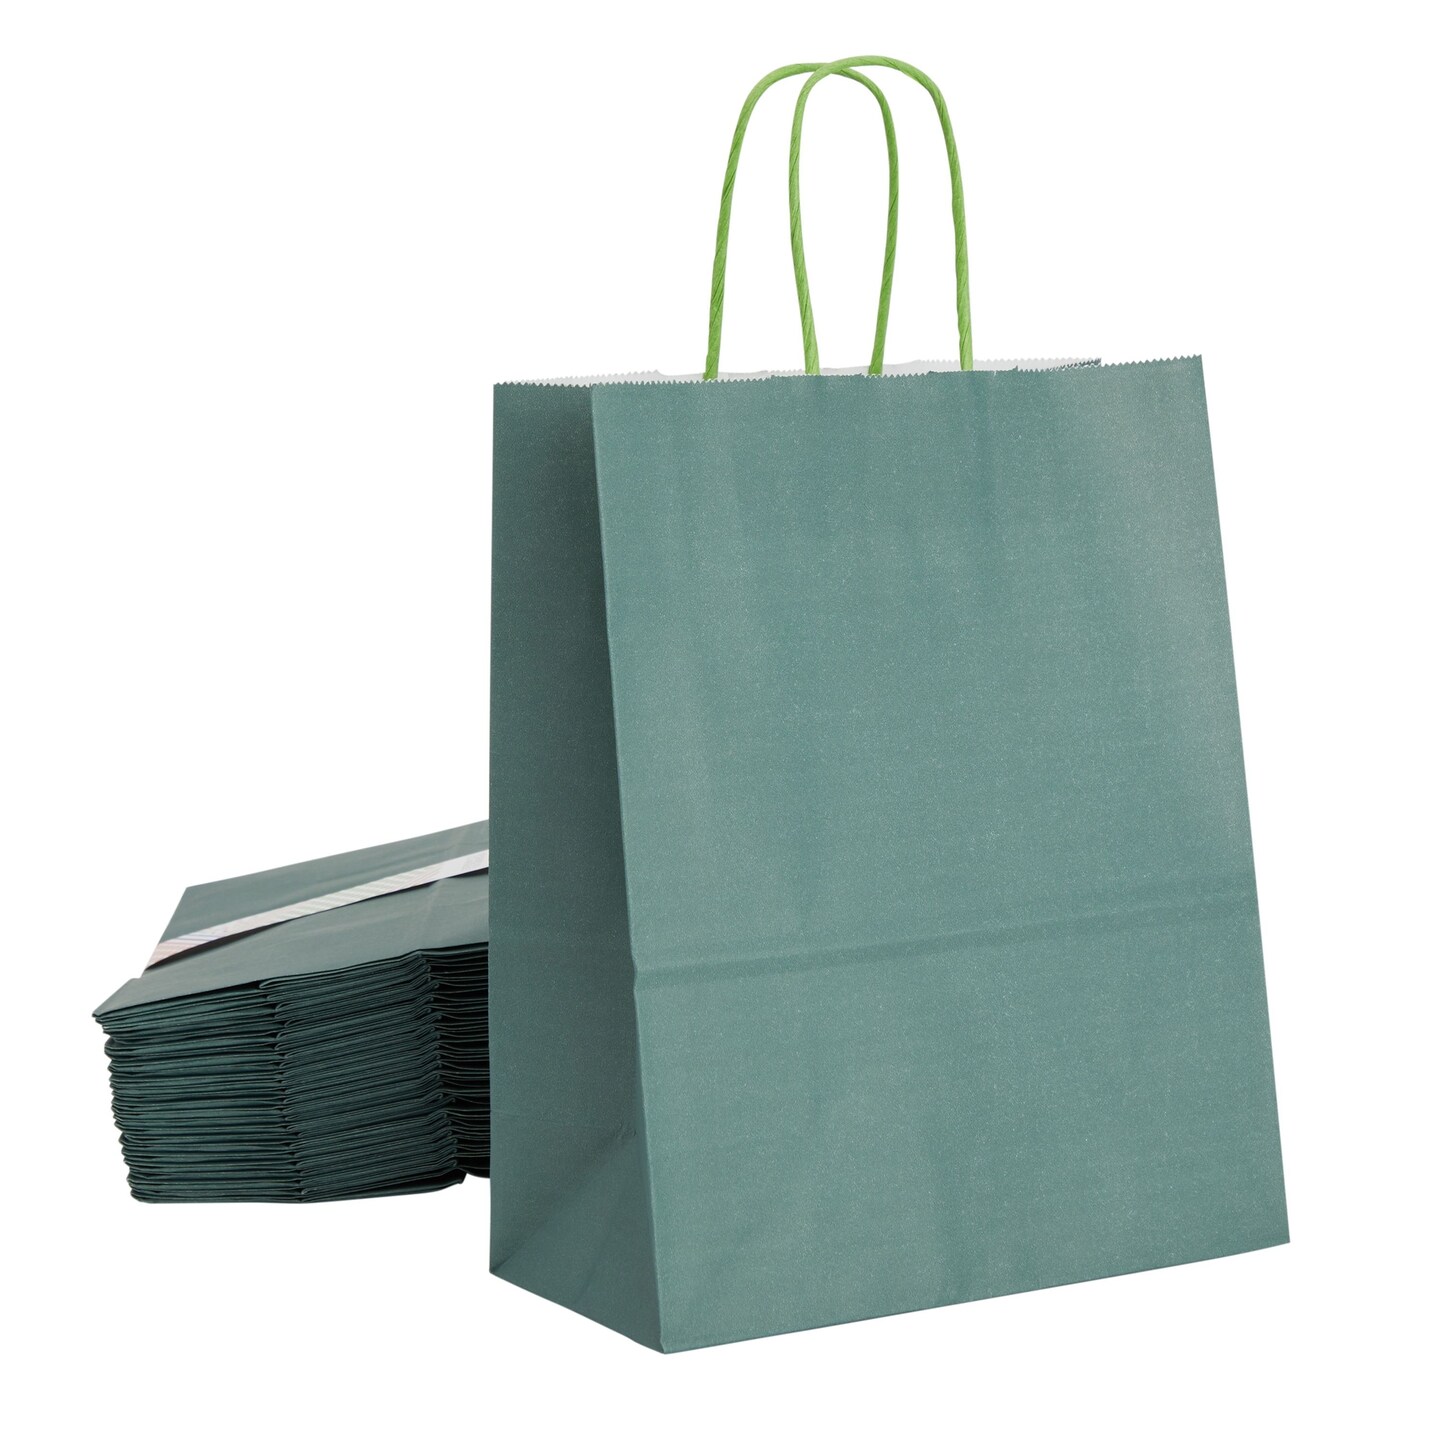 25-Pack Dark Green Gift Bags with Handles, 8x4x10-Inch Paper Goodie ...